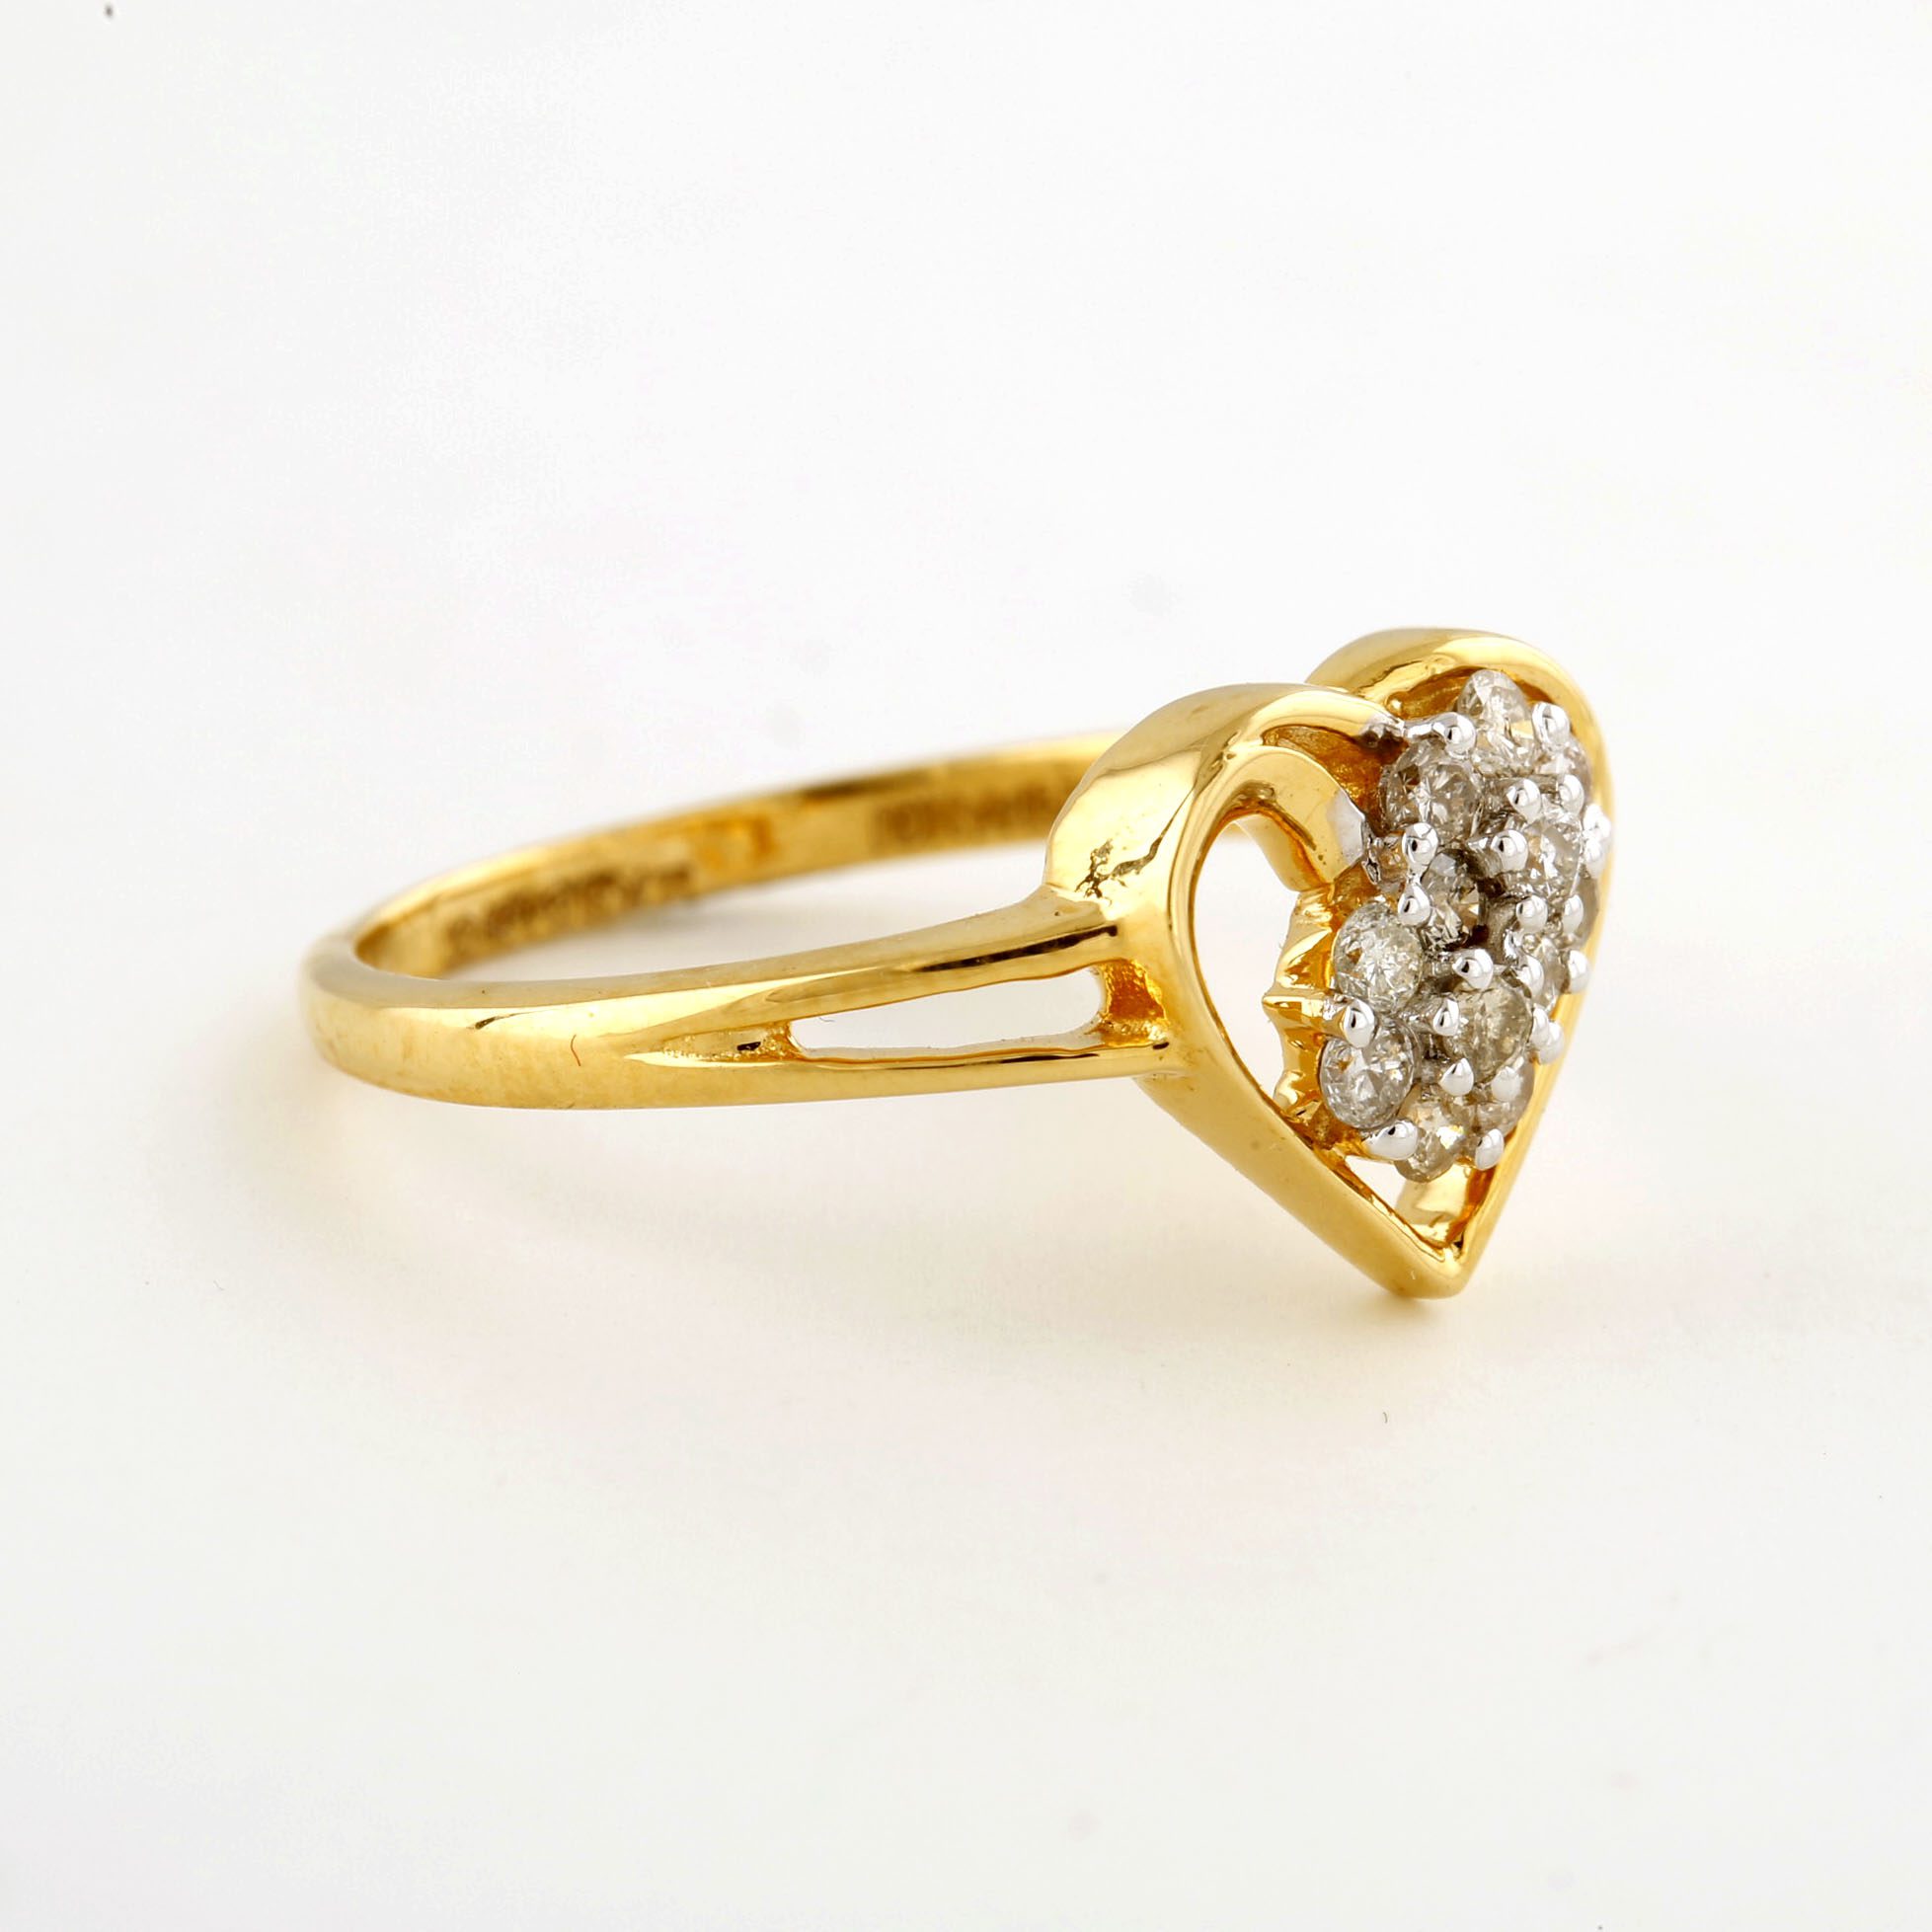 Heart Shaped Diamond Rings That She Will Absolutely Love – Raymond Lee  Jewelers